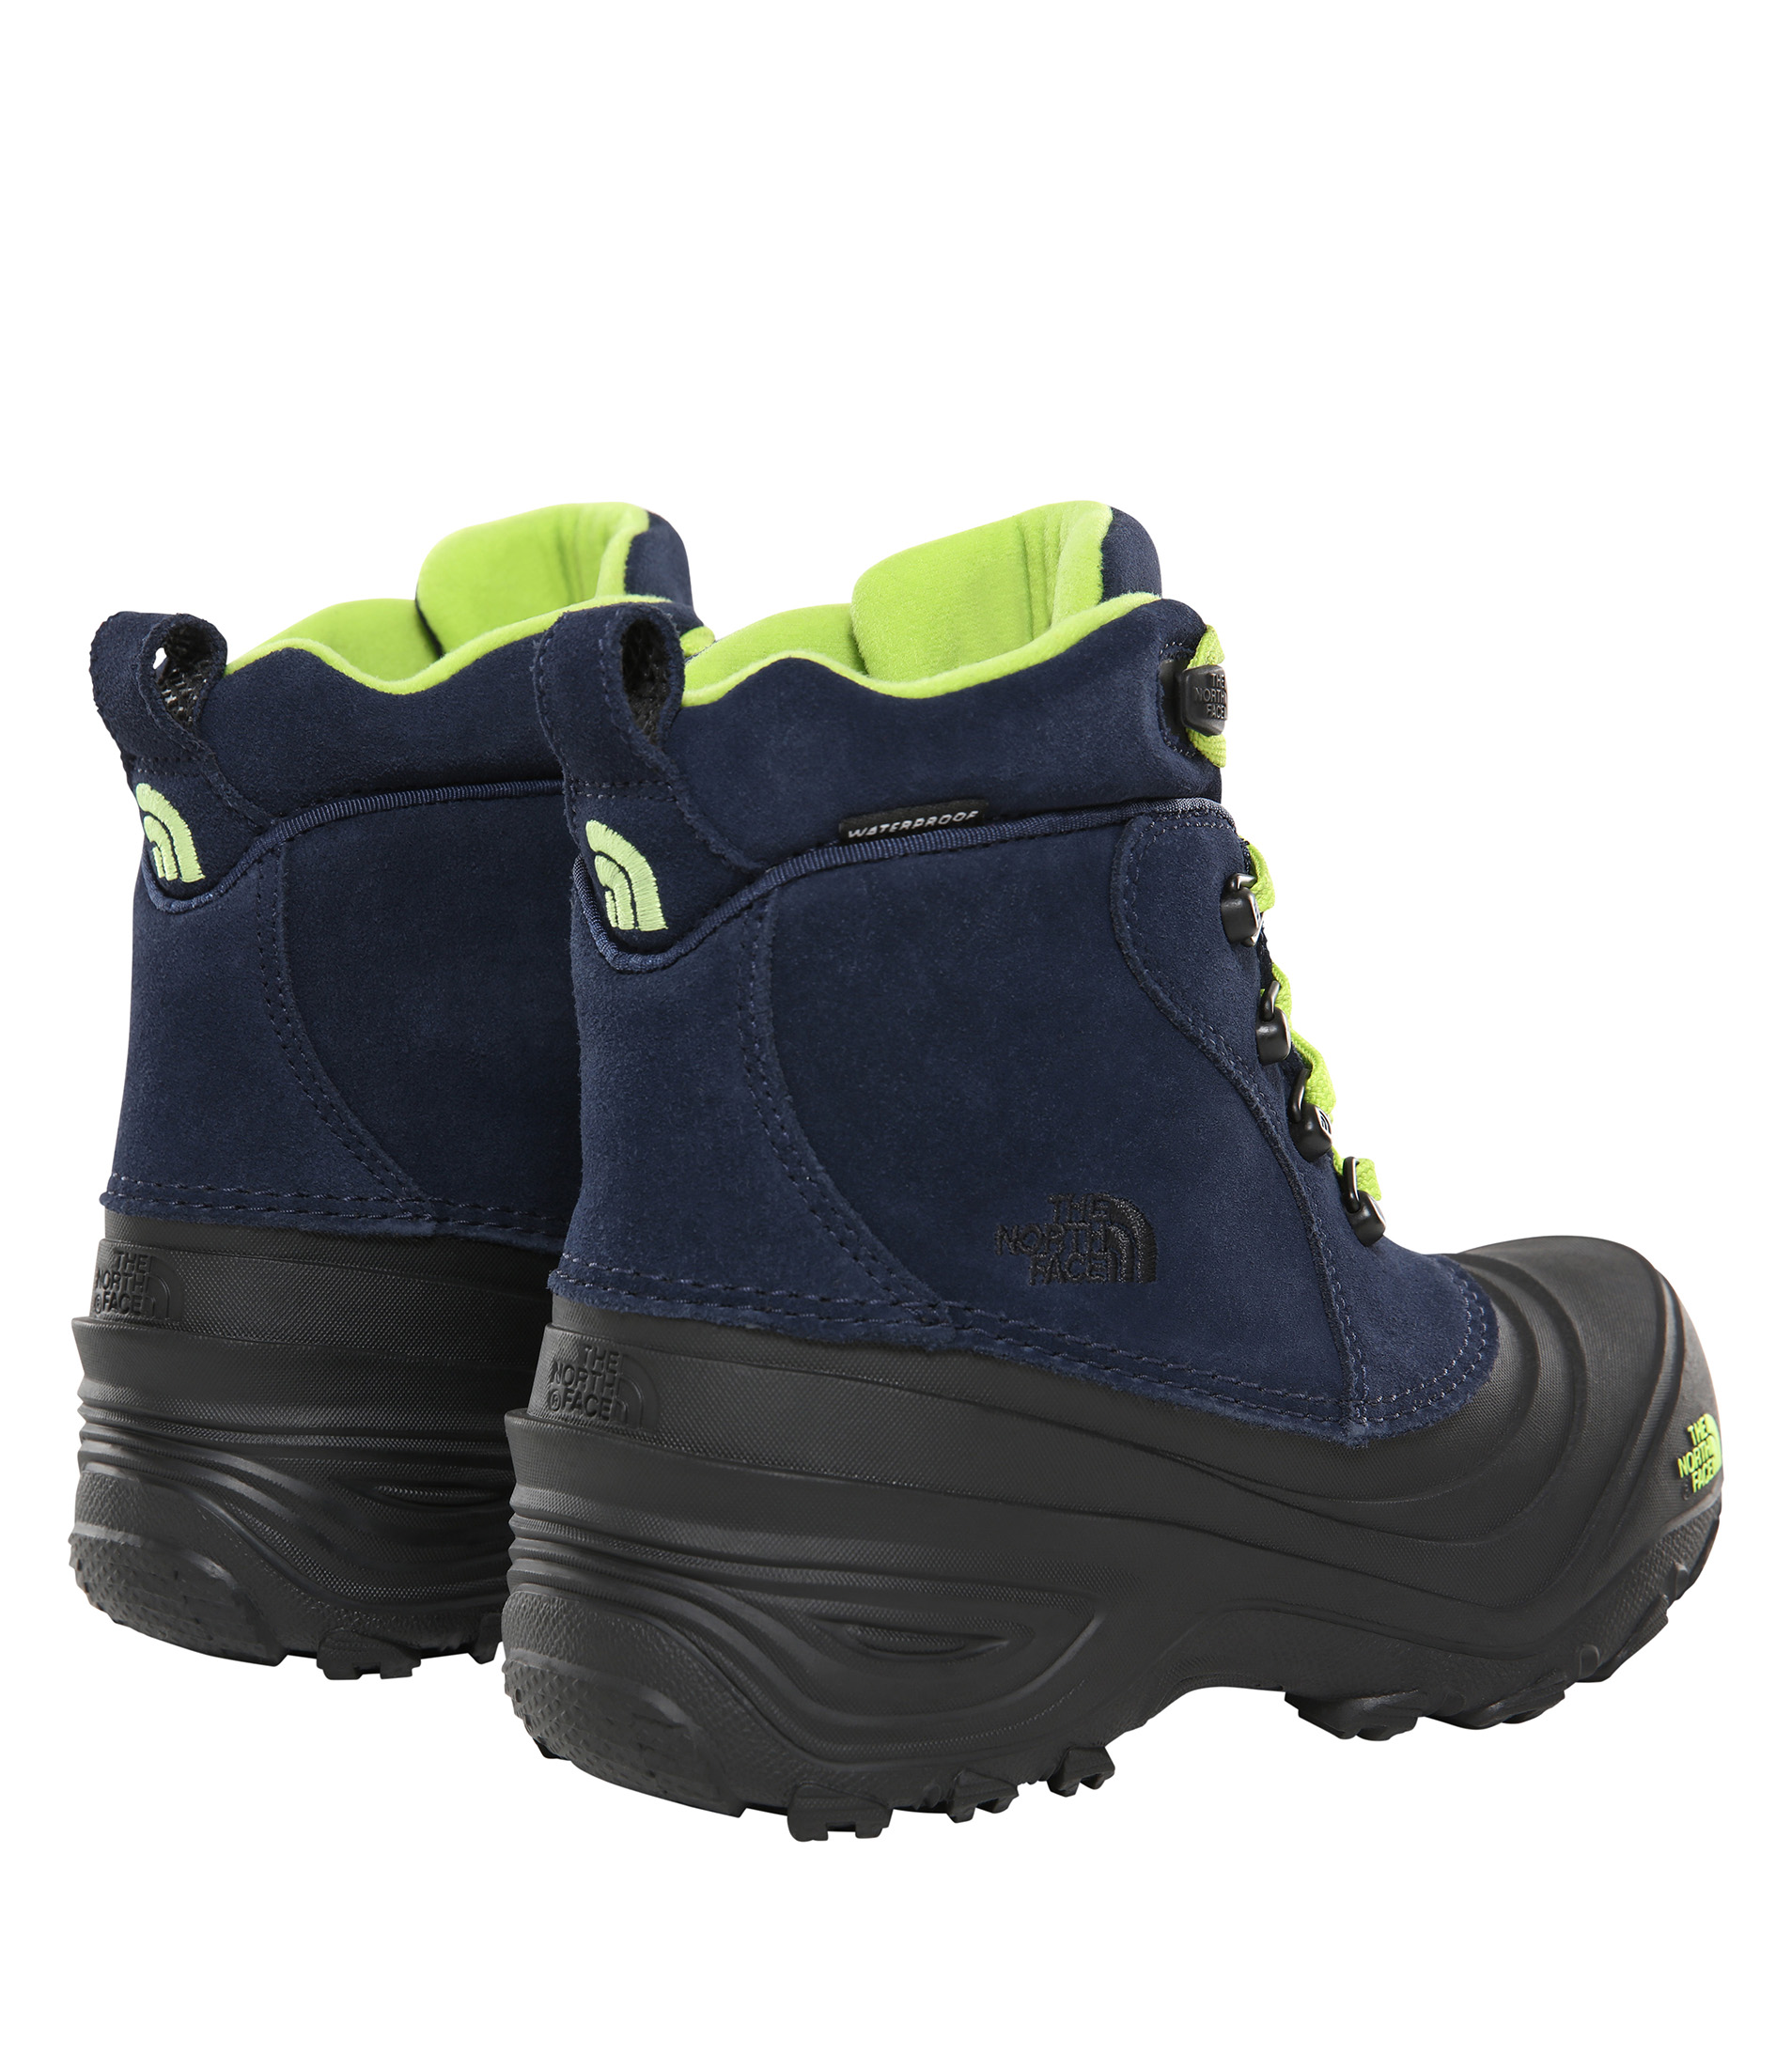 Y CHILKAT LACE II 5UK - COSMIC BLUE/LIME GREEN